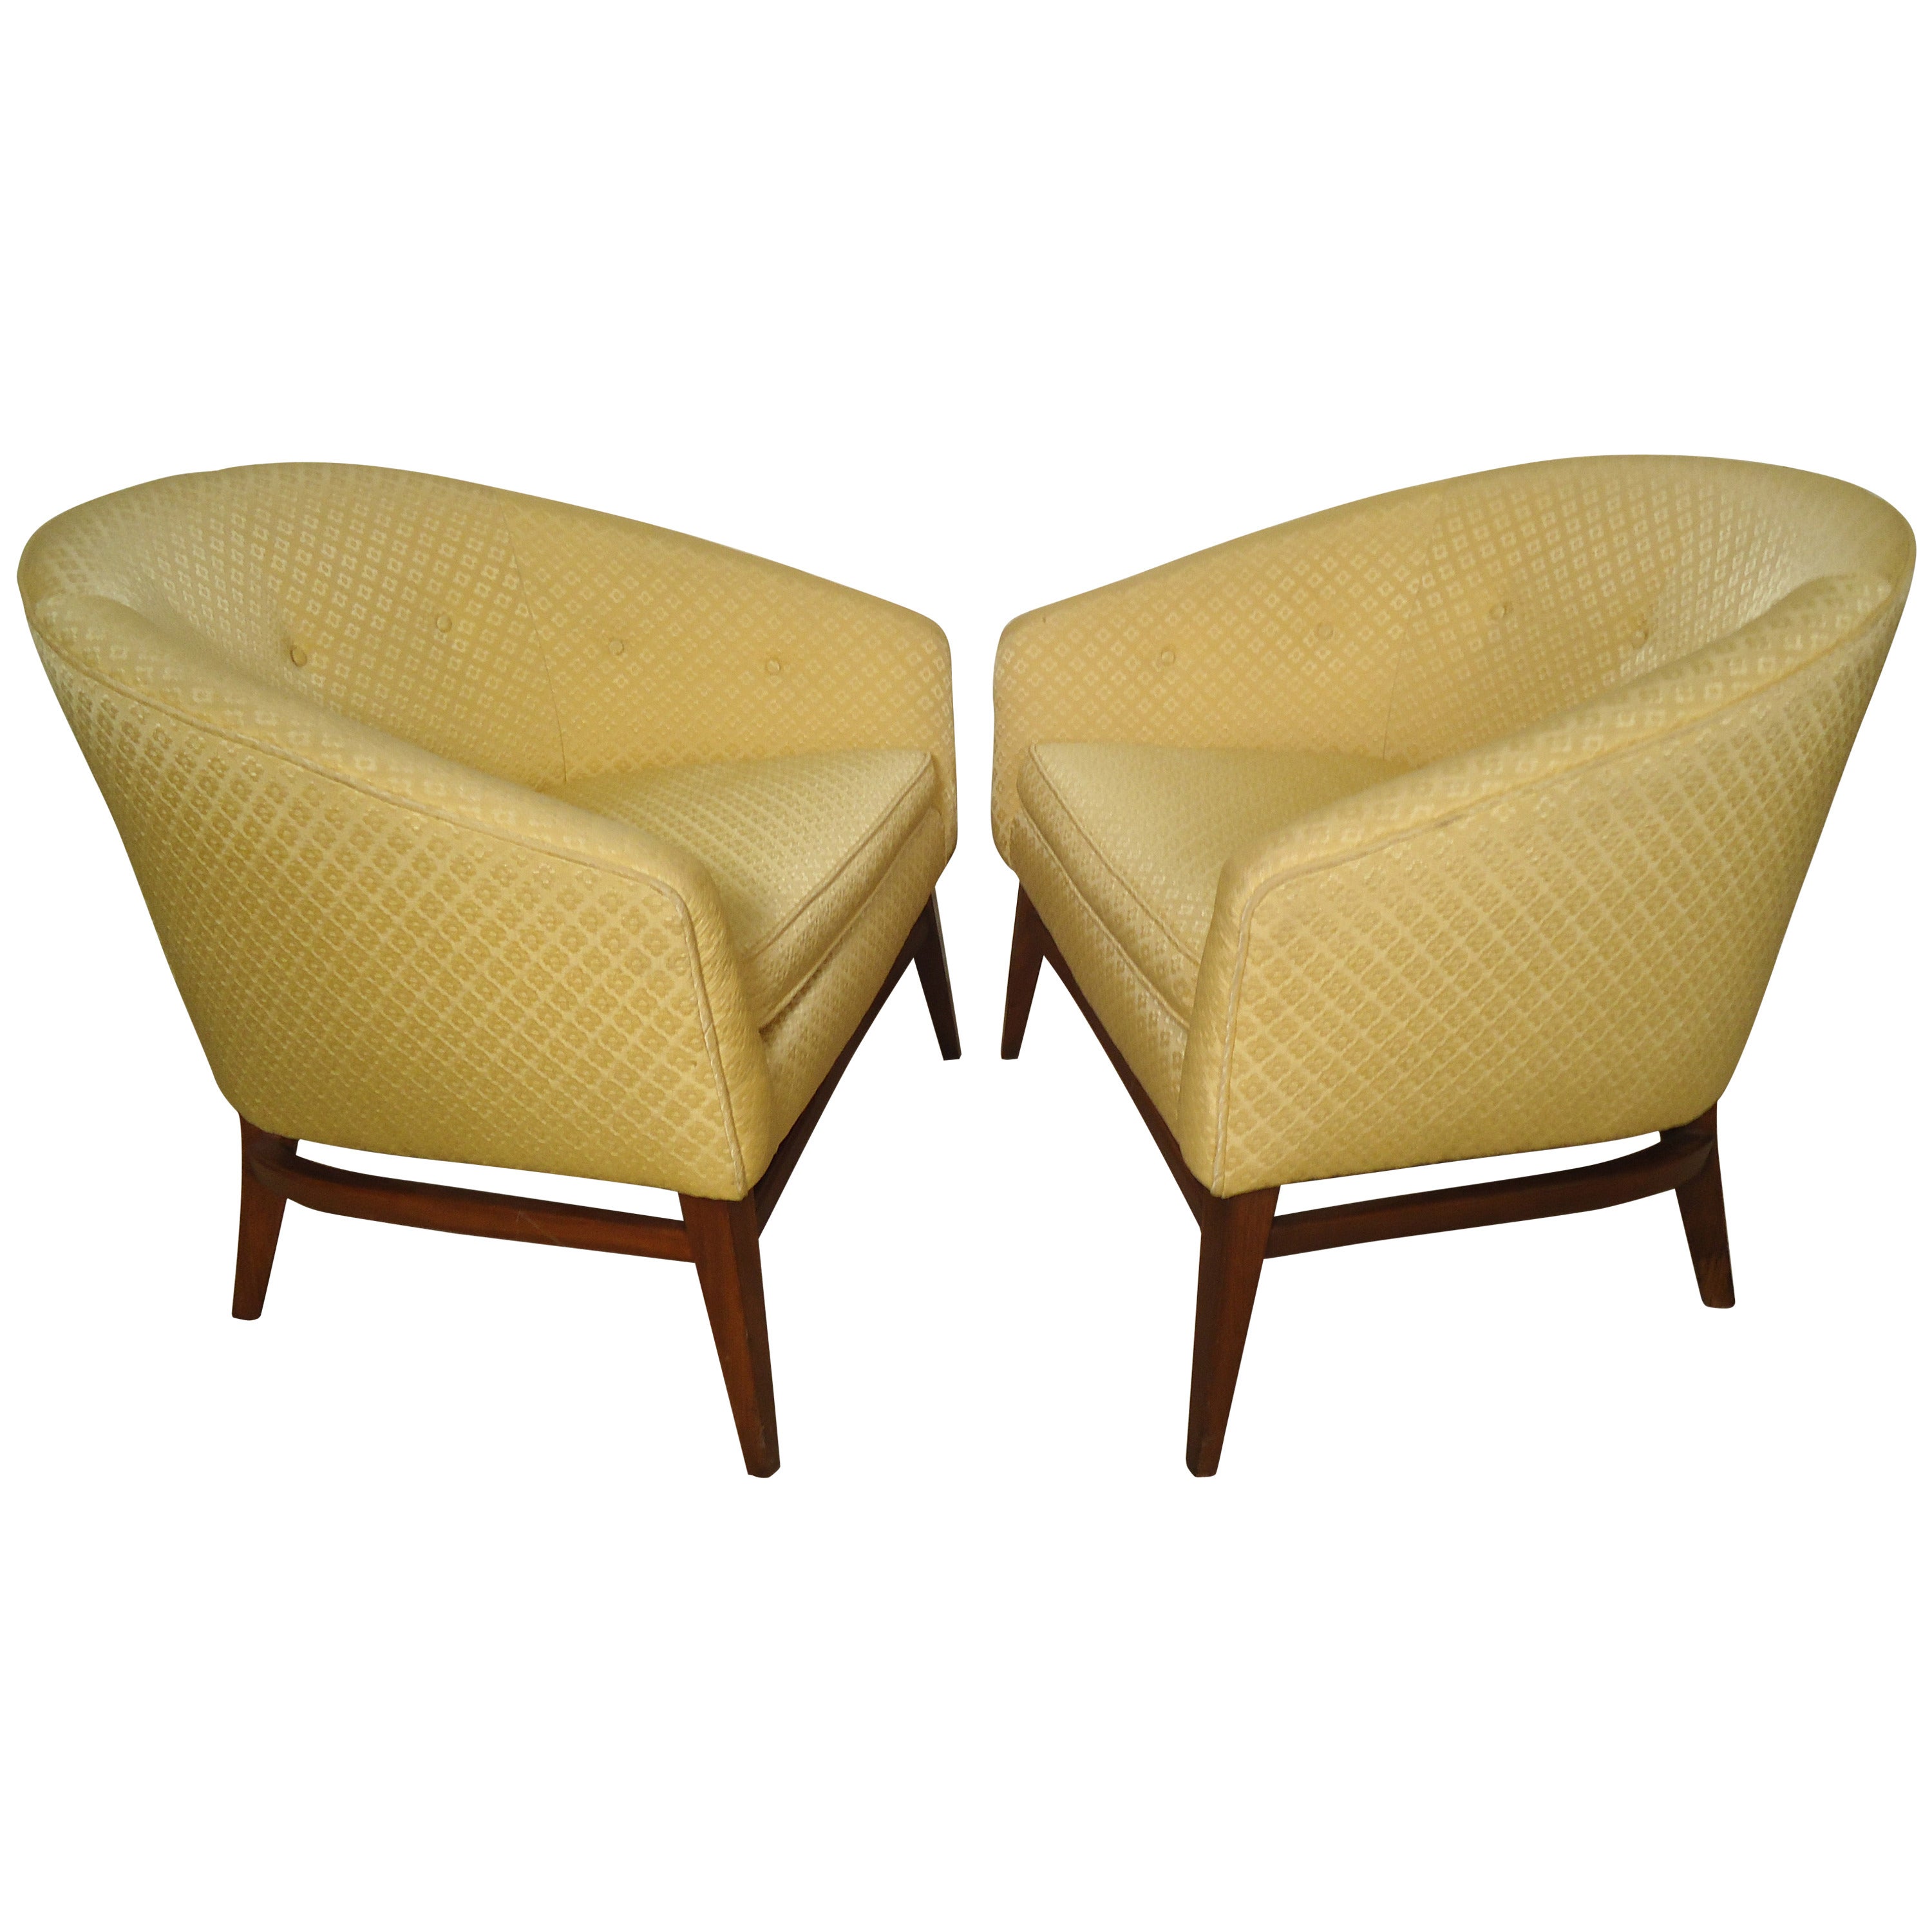 Pair of Mid-century Barrel Chairs by Lawrence Peabody for Craft Associates For Sale